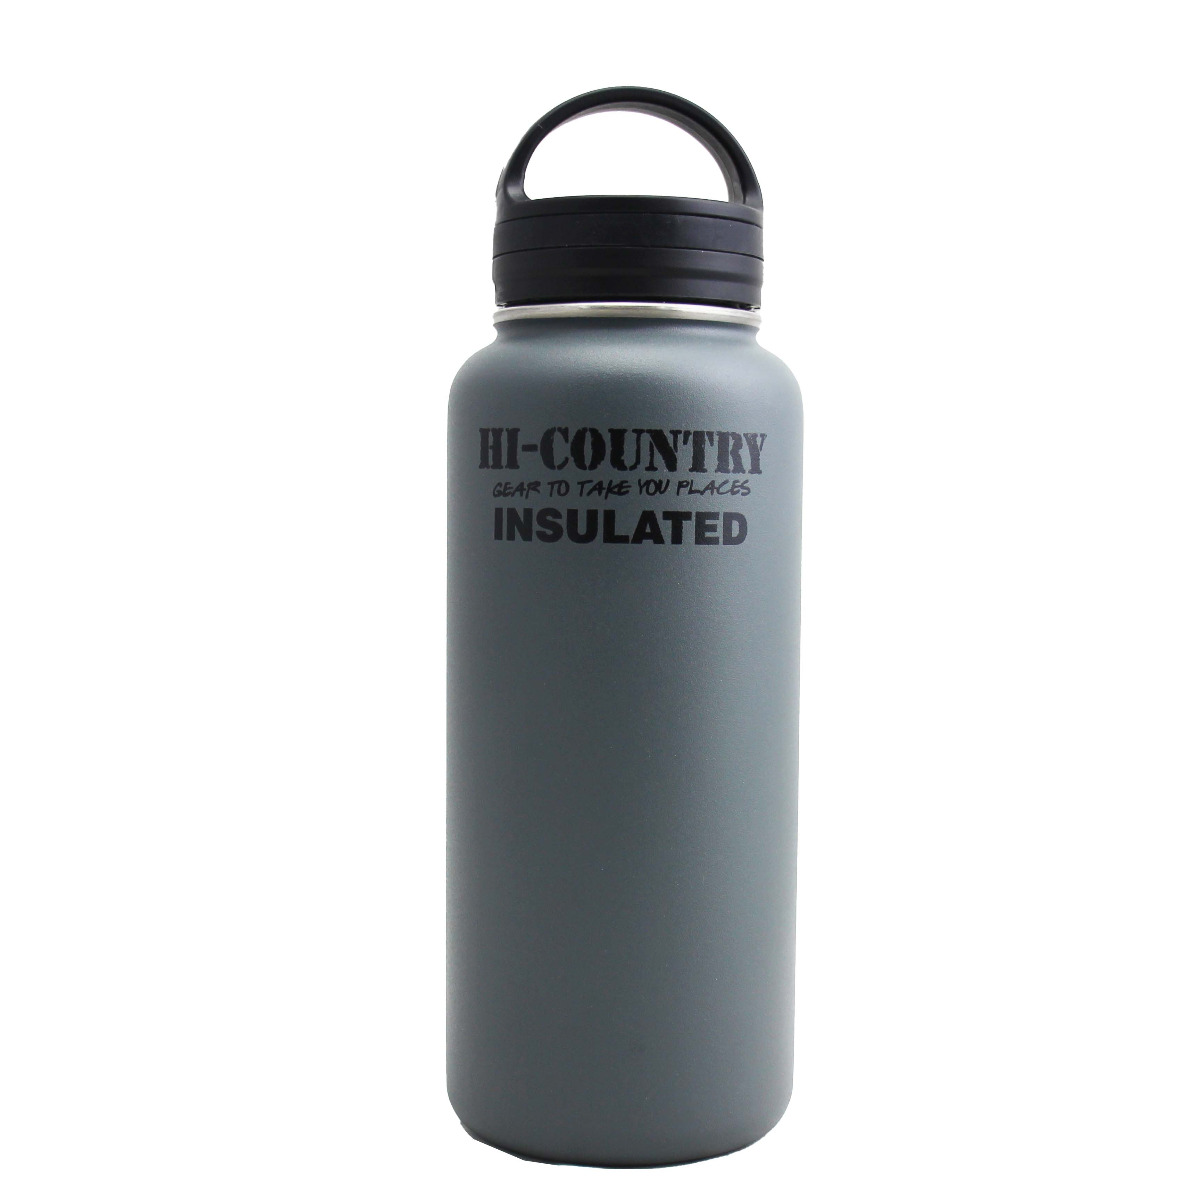 Hi Country 1000ml double wall Stainless Steel Drink Bottle Grey. 